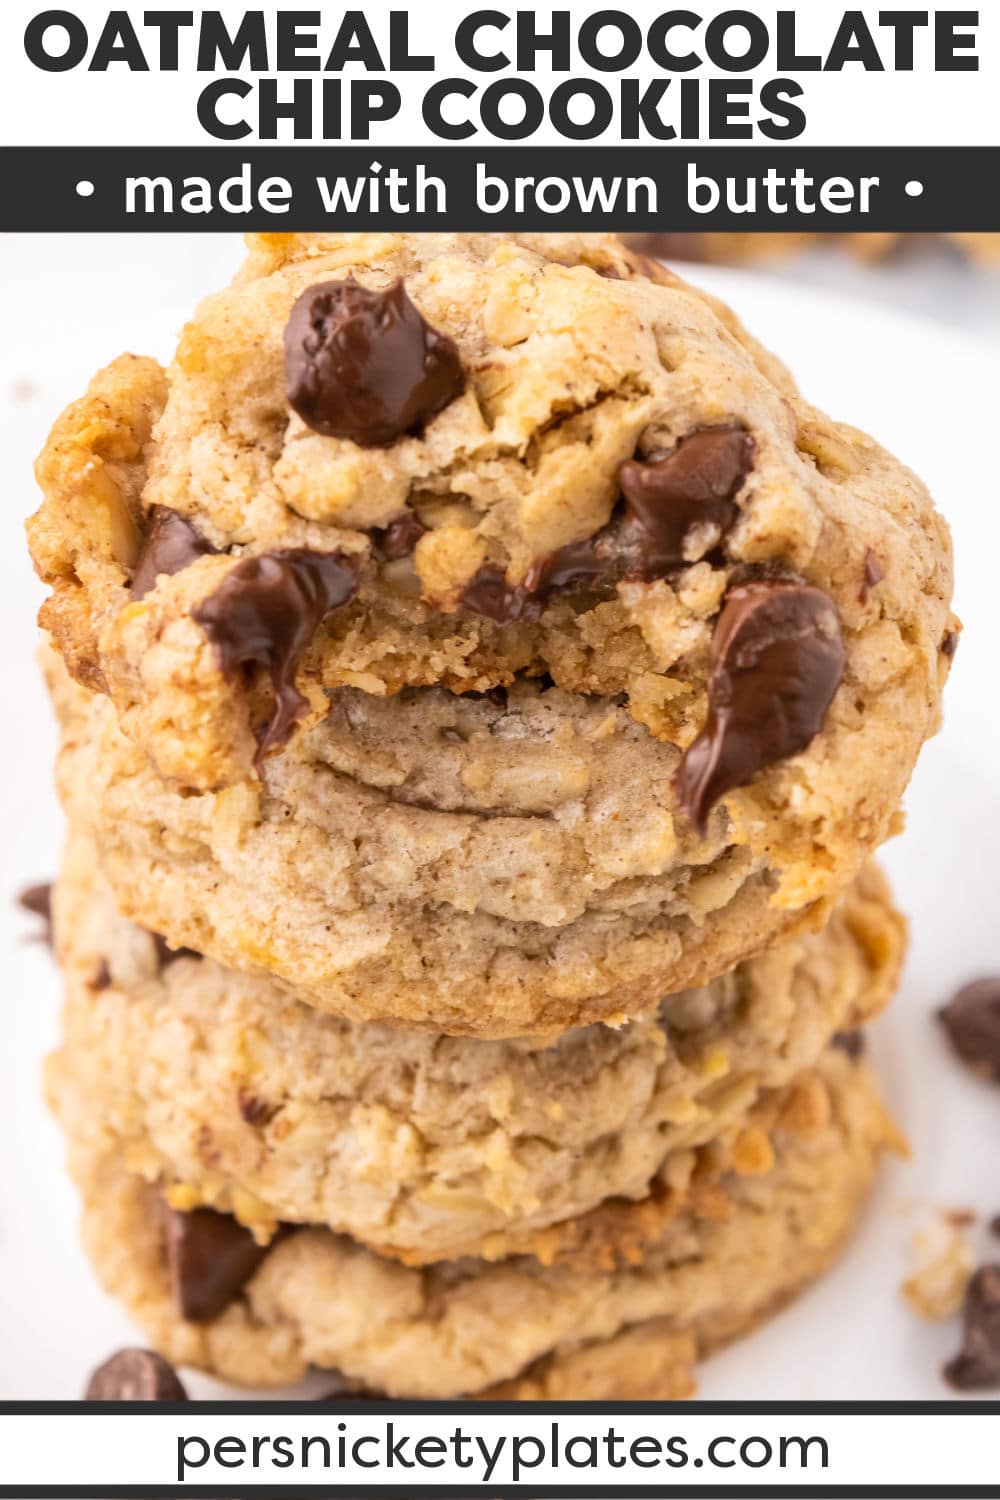 Thick & chewy Brown Butter Oatmeal Chocolate Chip Cookies are filled with oats, chocolate chips, and nutty brown butter. Meet your new favorite cookie! | www.persnicketyplates.com